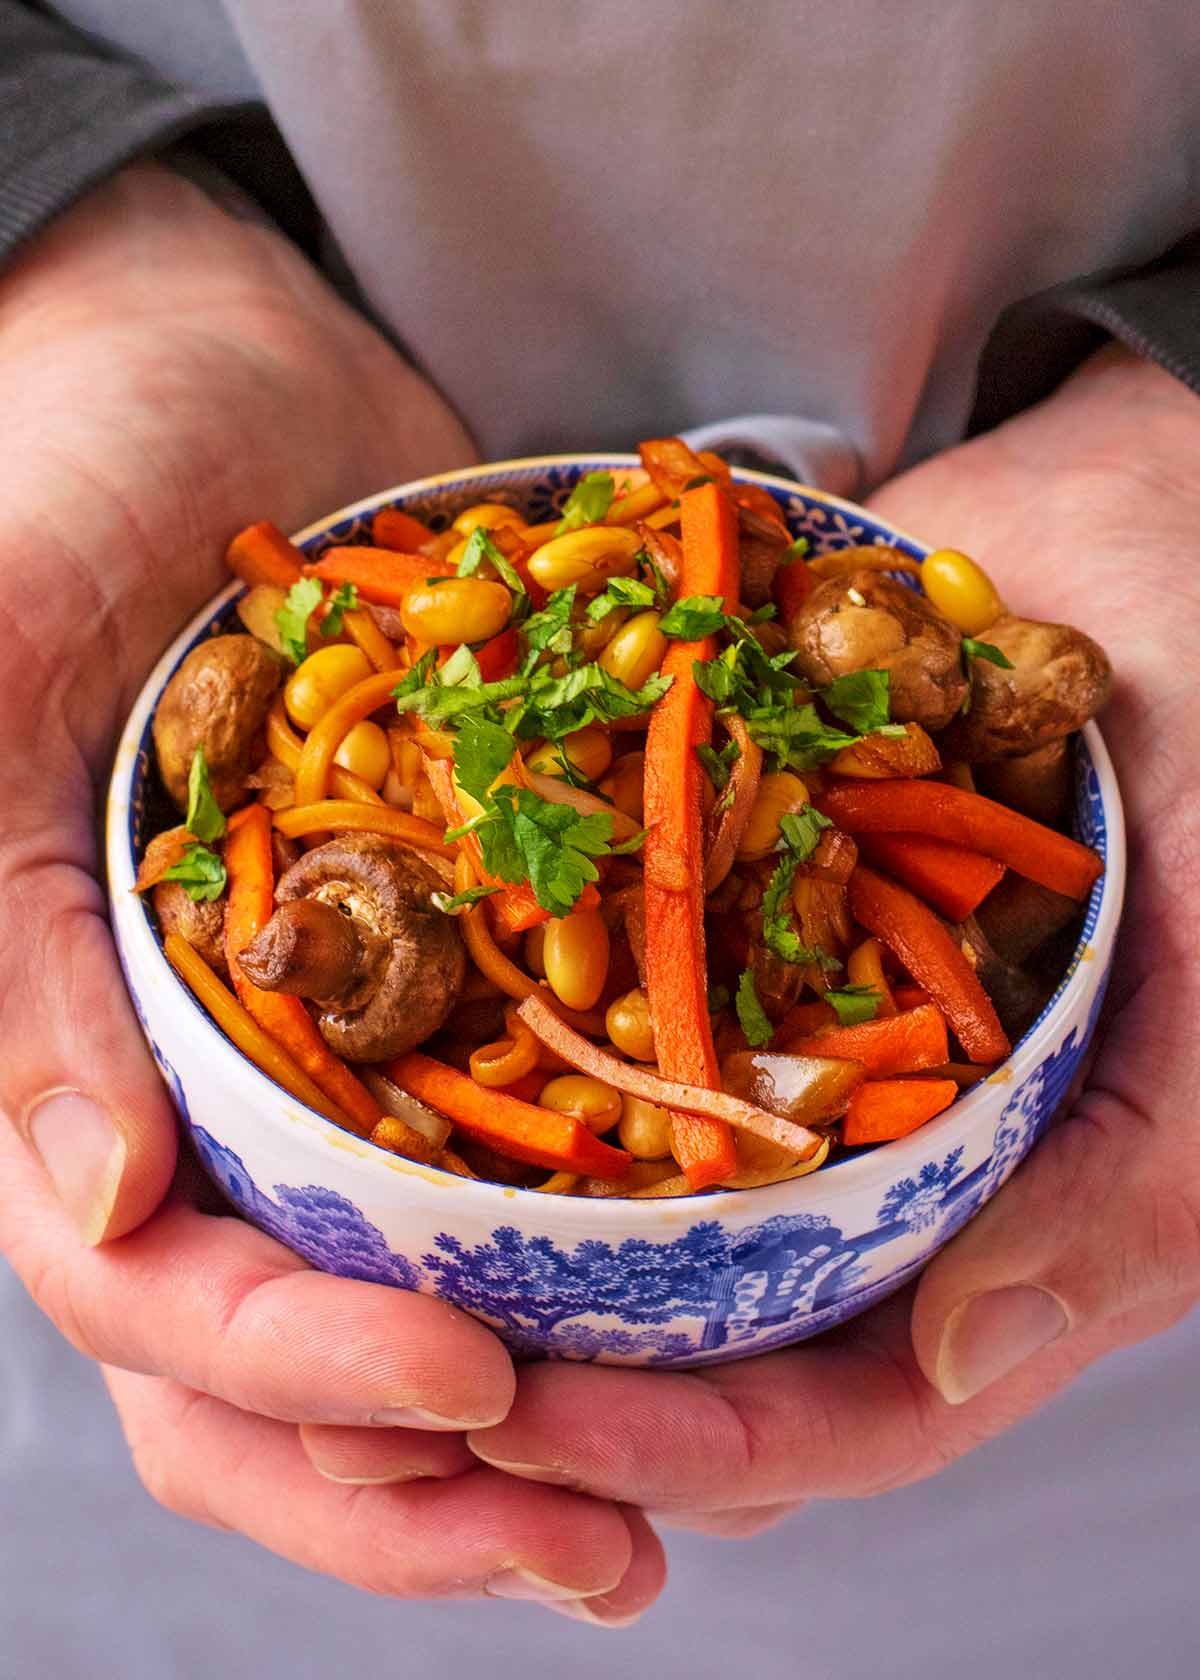 A pair of hands holding a bowl of vegetable noodles.